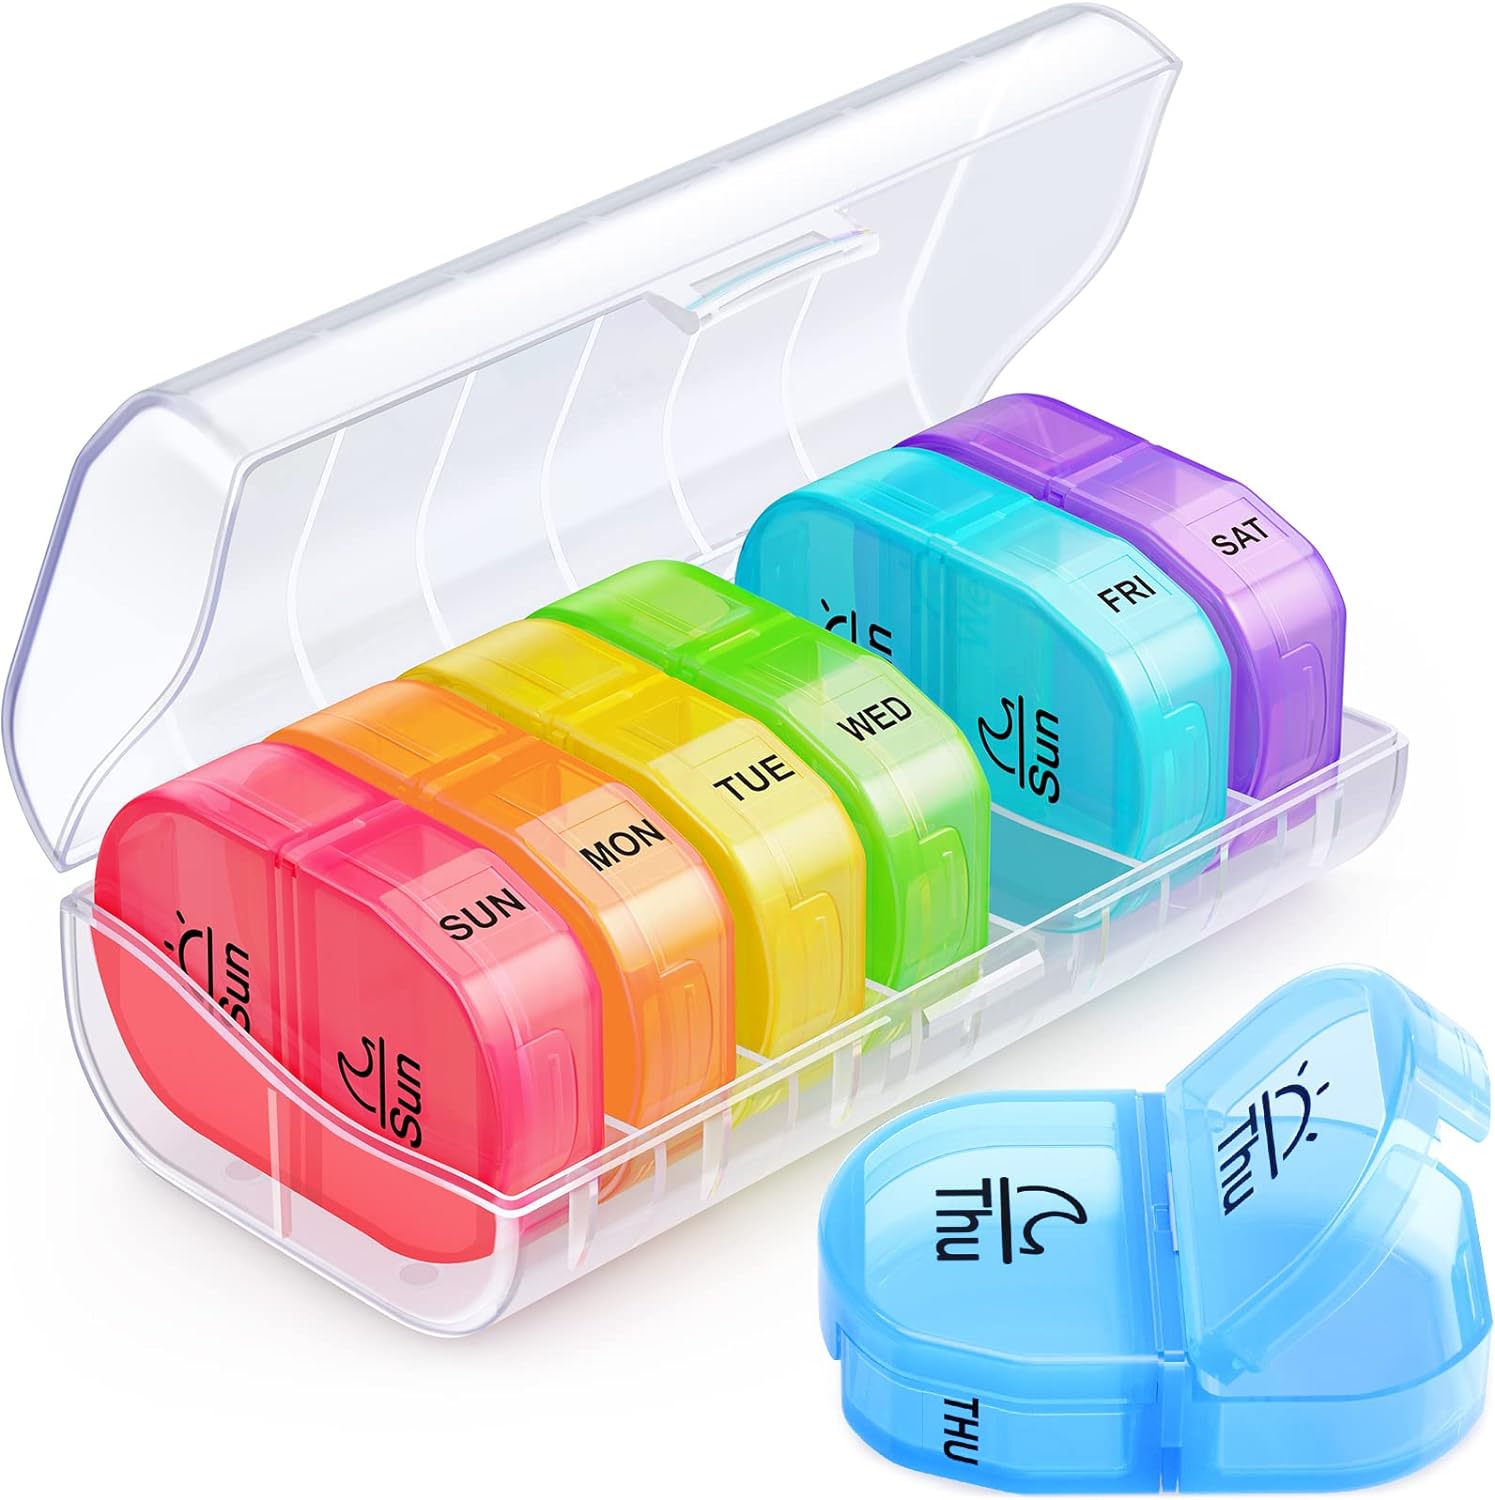 This pill container is great. Keeps everything organized for my morning and evening meds. I take 10 pills in the morning and it holds all with room to spare. Not child safe so make sure to keep out of reach. Sturdy, holds up well in luggage or handbag.